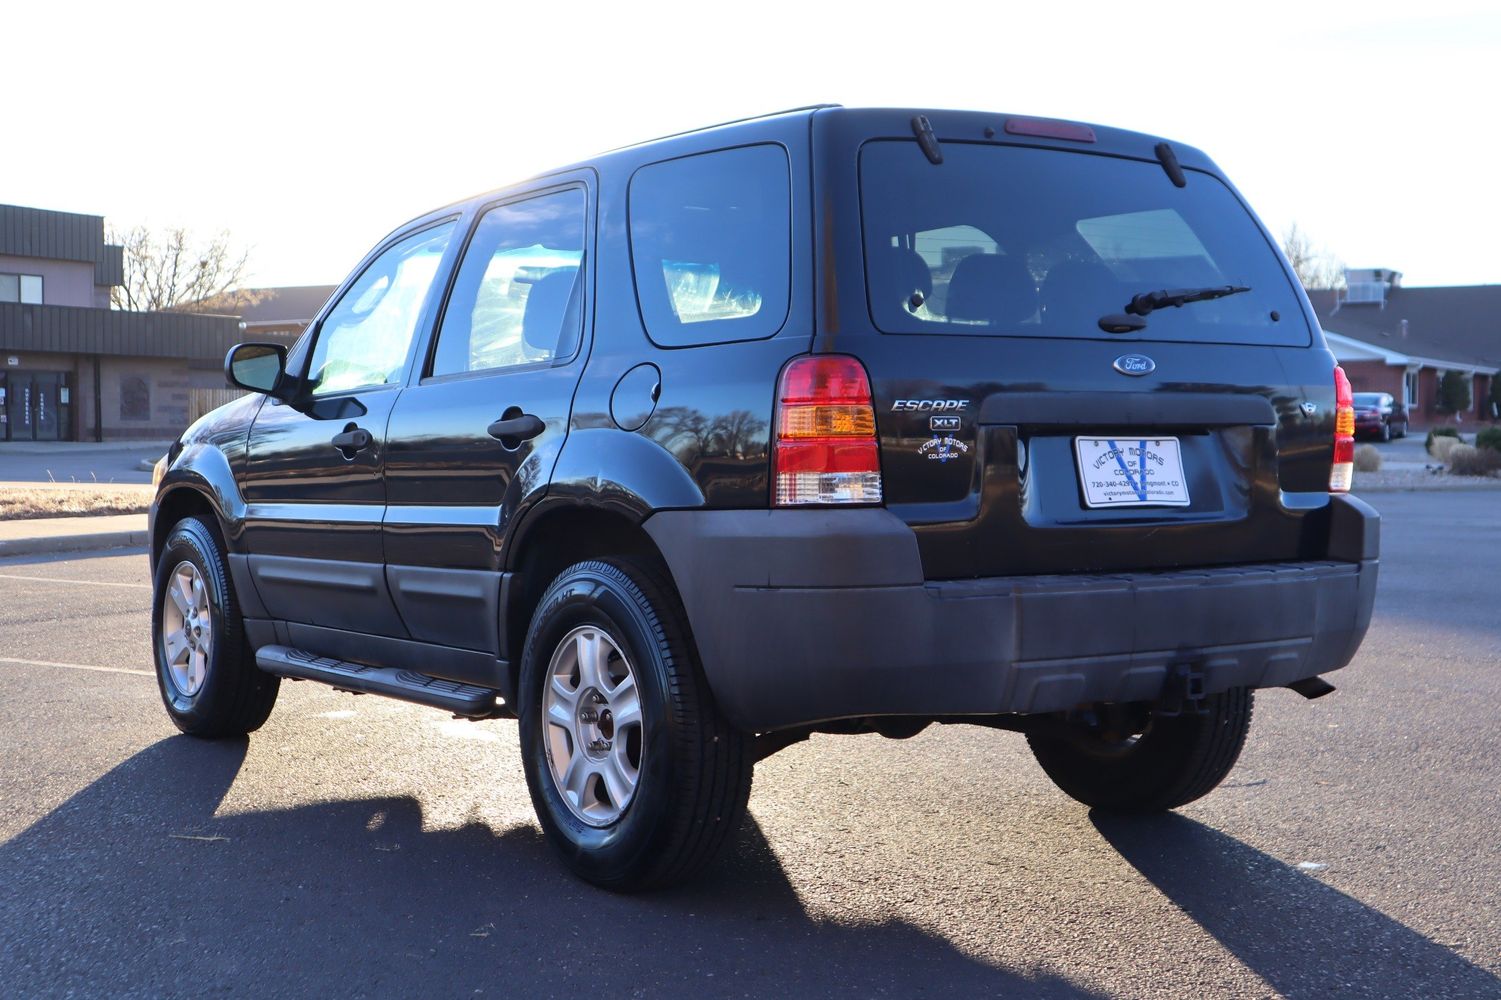 2007 Ford Escape XLT | Victory Motors of Colorado 2007 Ford Escape V6 Towing Capacity